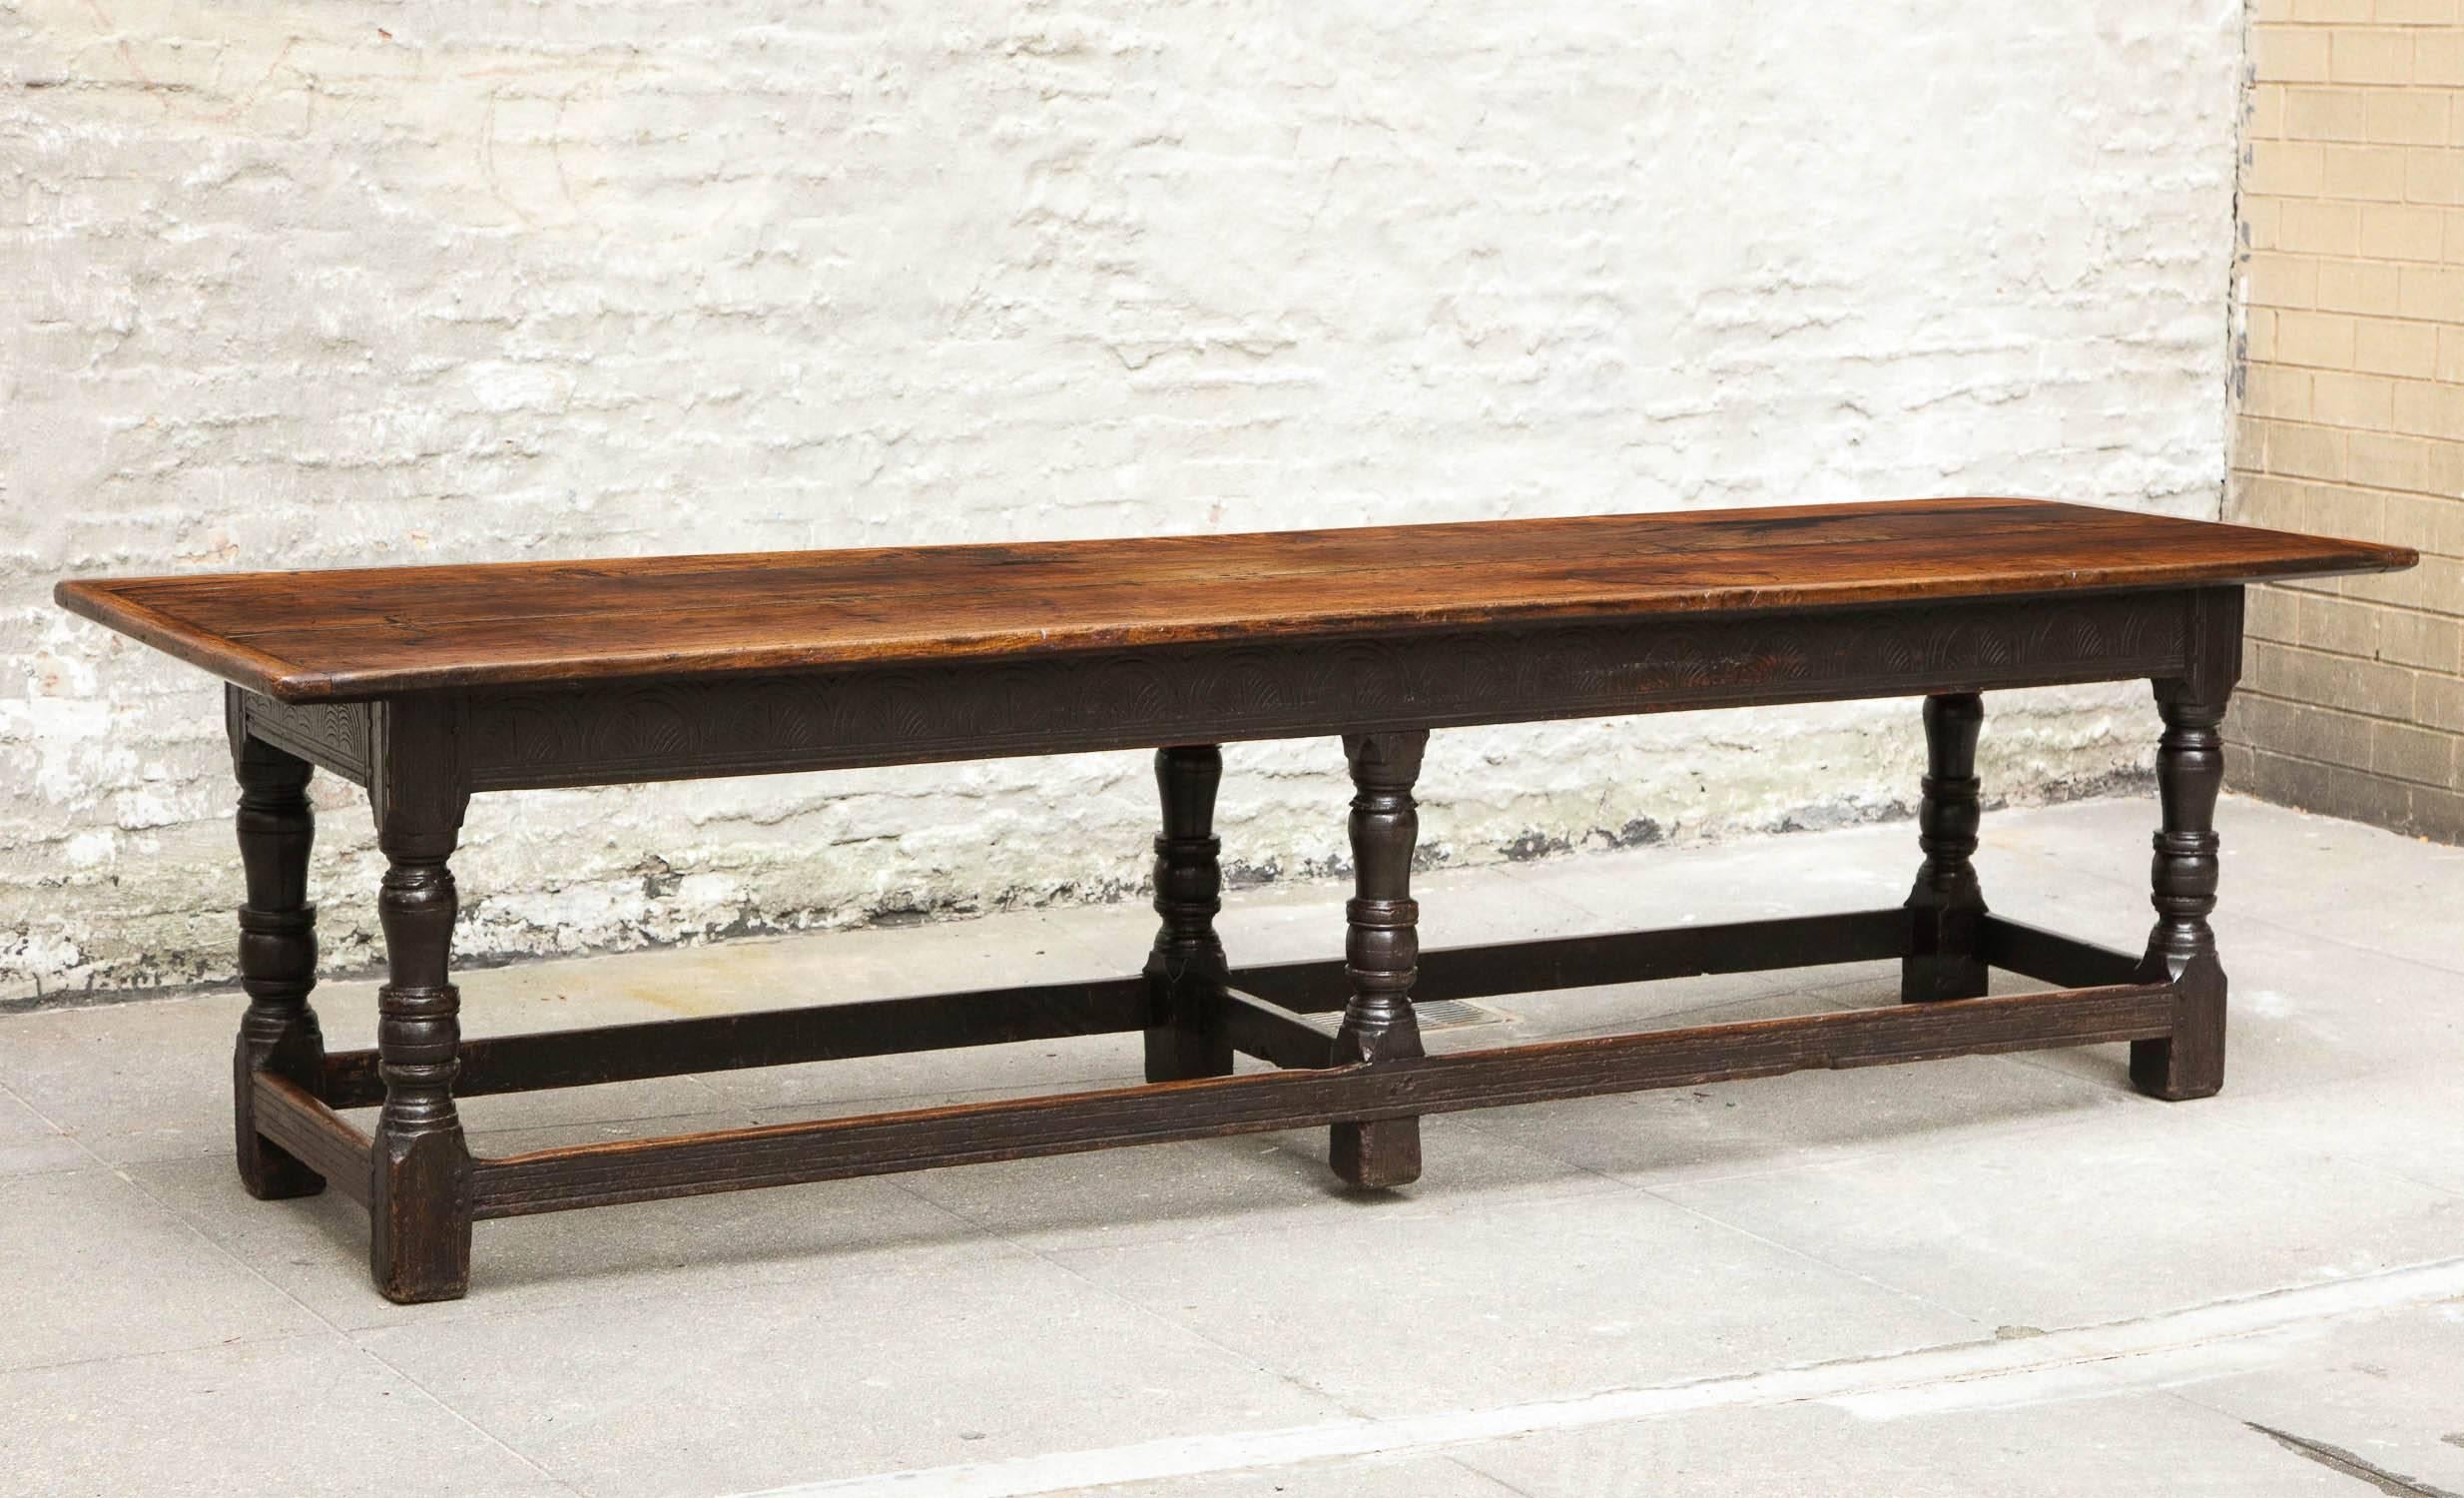 Fine 17th century welsh oak refectory table, the three plank top with breadboard ends over six-legged base, the apron with lunette carved apron, over balustrade turned legs joined by molded box stretchers, the whole with exceptional patina and in